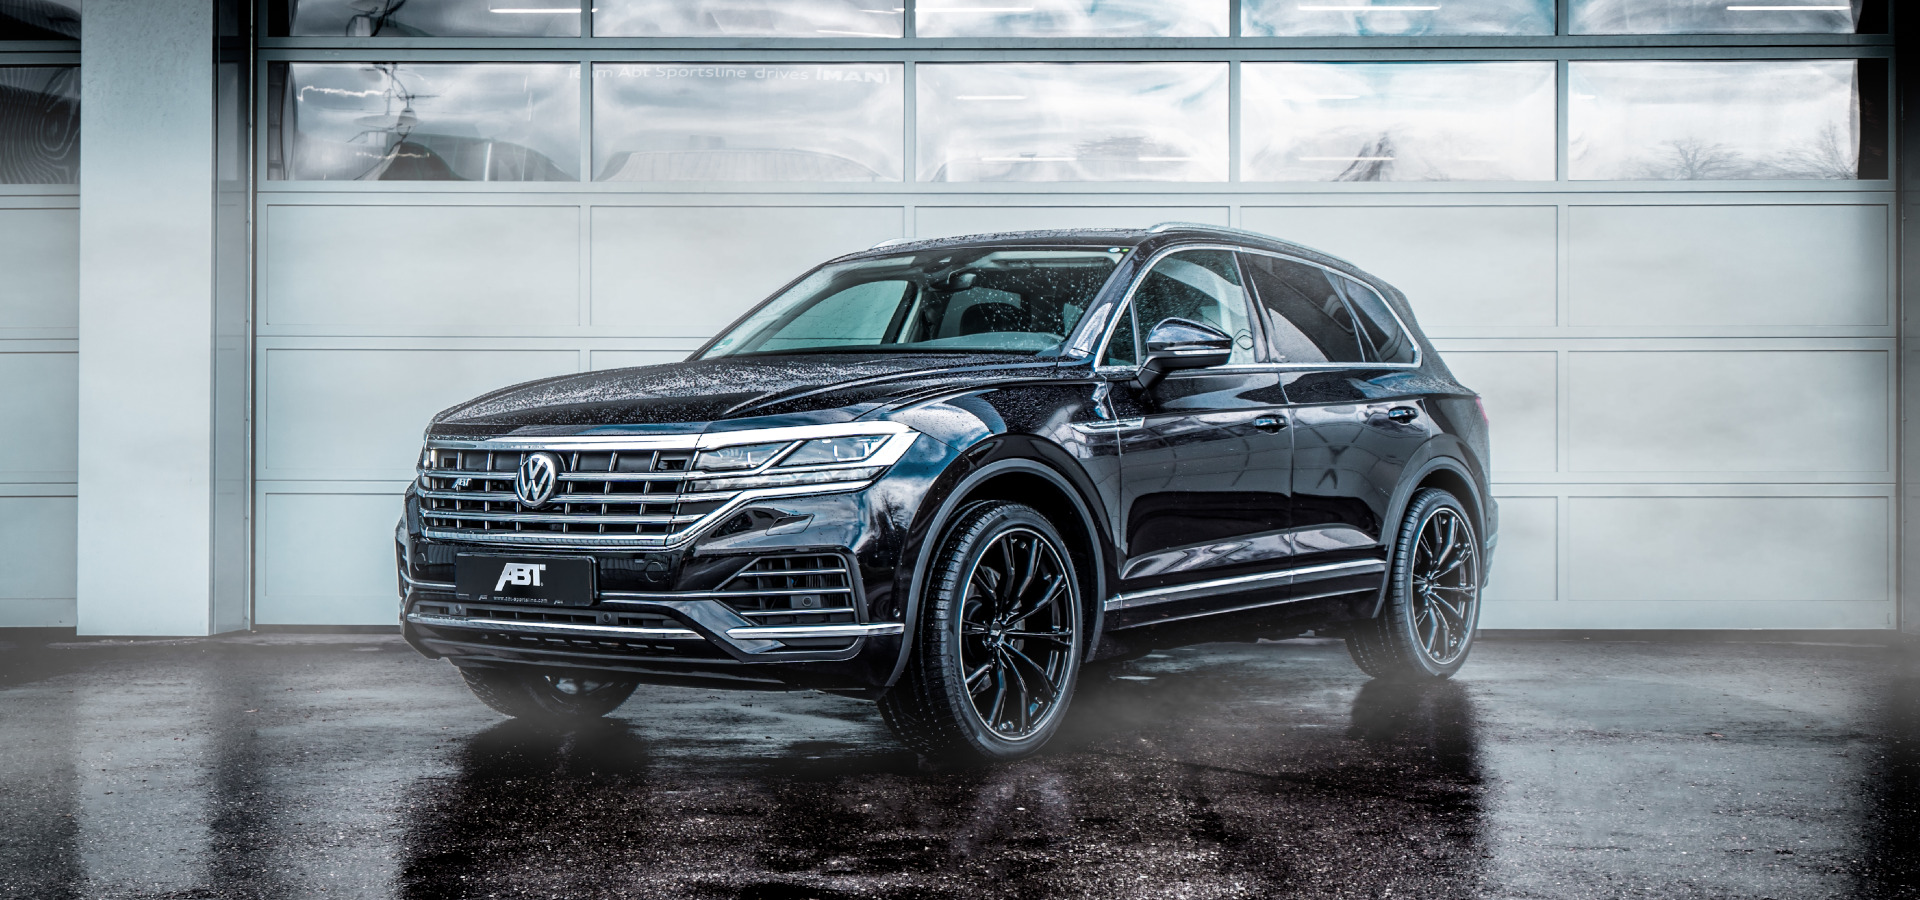 ABT Touareg: Premium SUV with up to 385 HP - Audi Tuning, VW Tuning,  Chiptuning von ABT Sportsline.